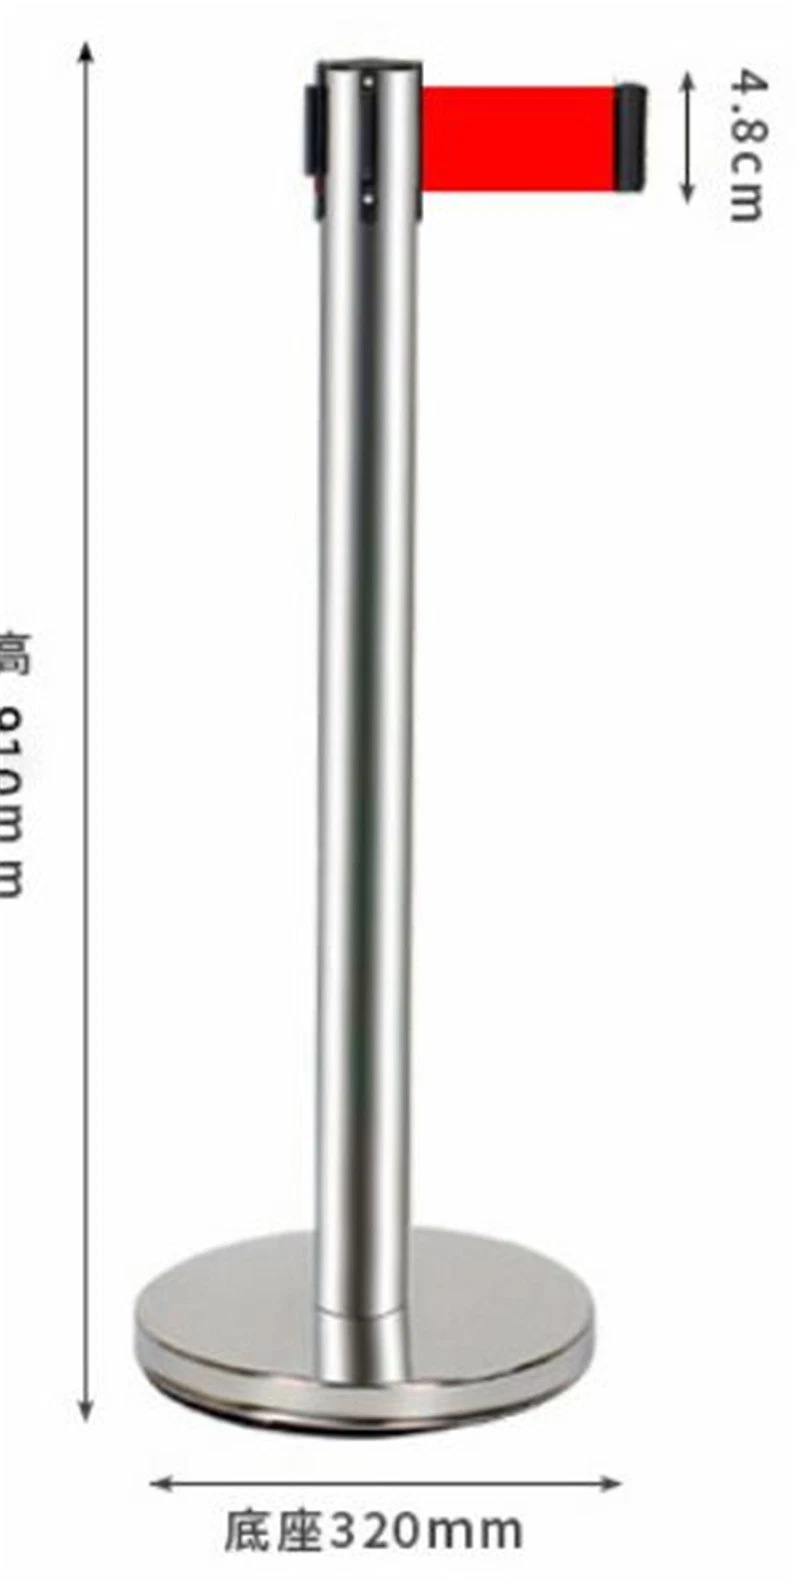 Wholesale Roadway Products Stainless Queue Pole, Good Quality Road Safety Crowd Control Barrier